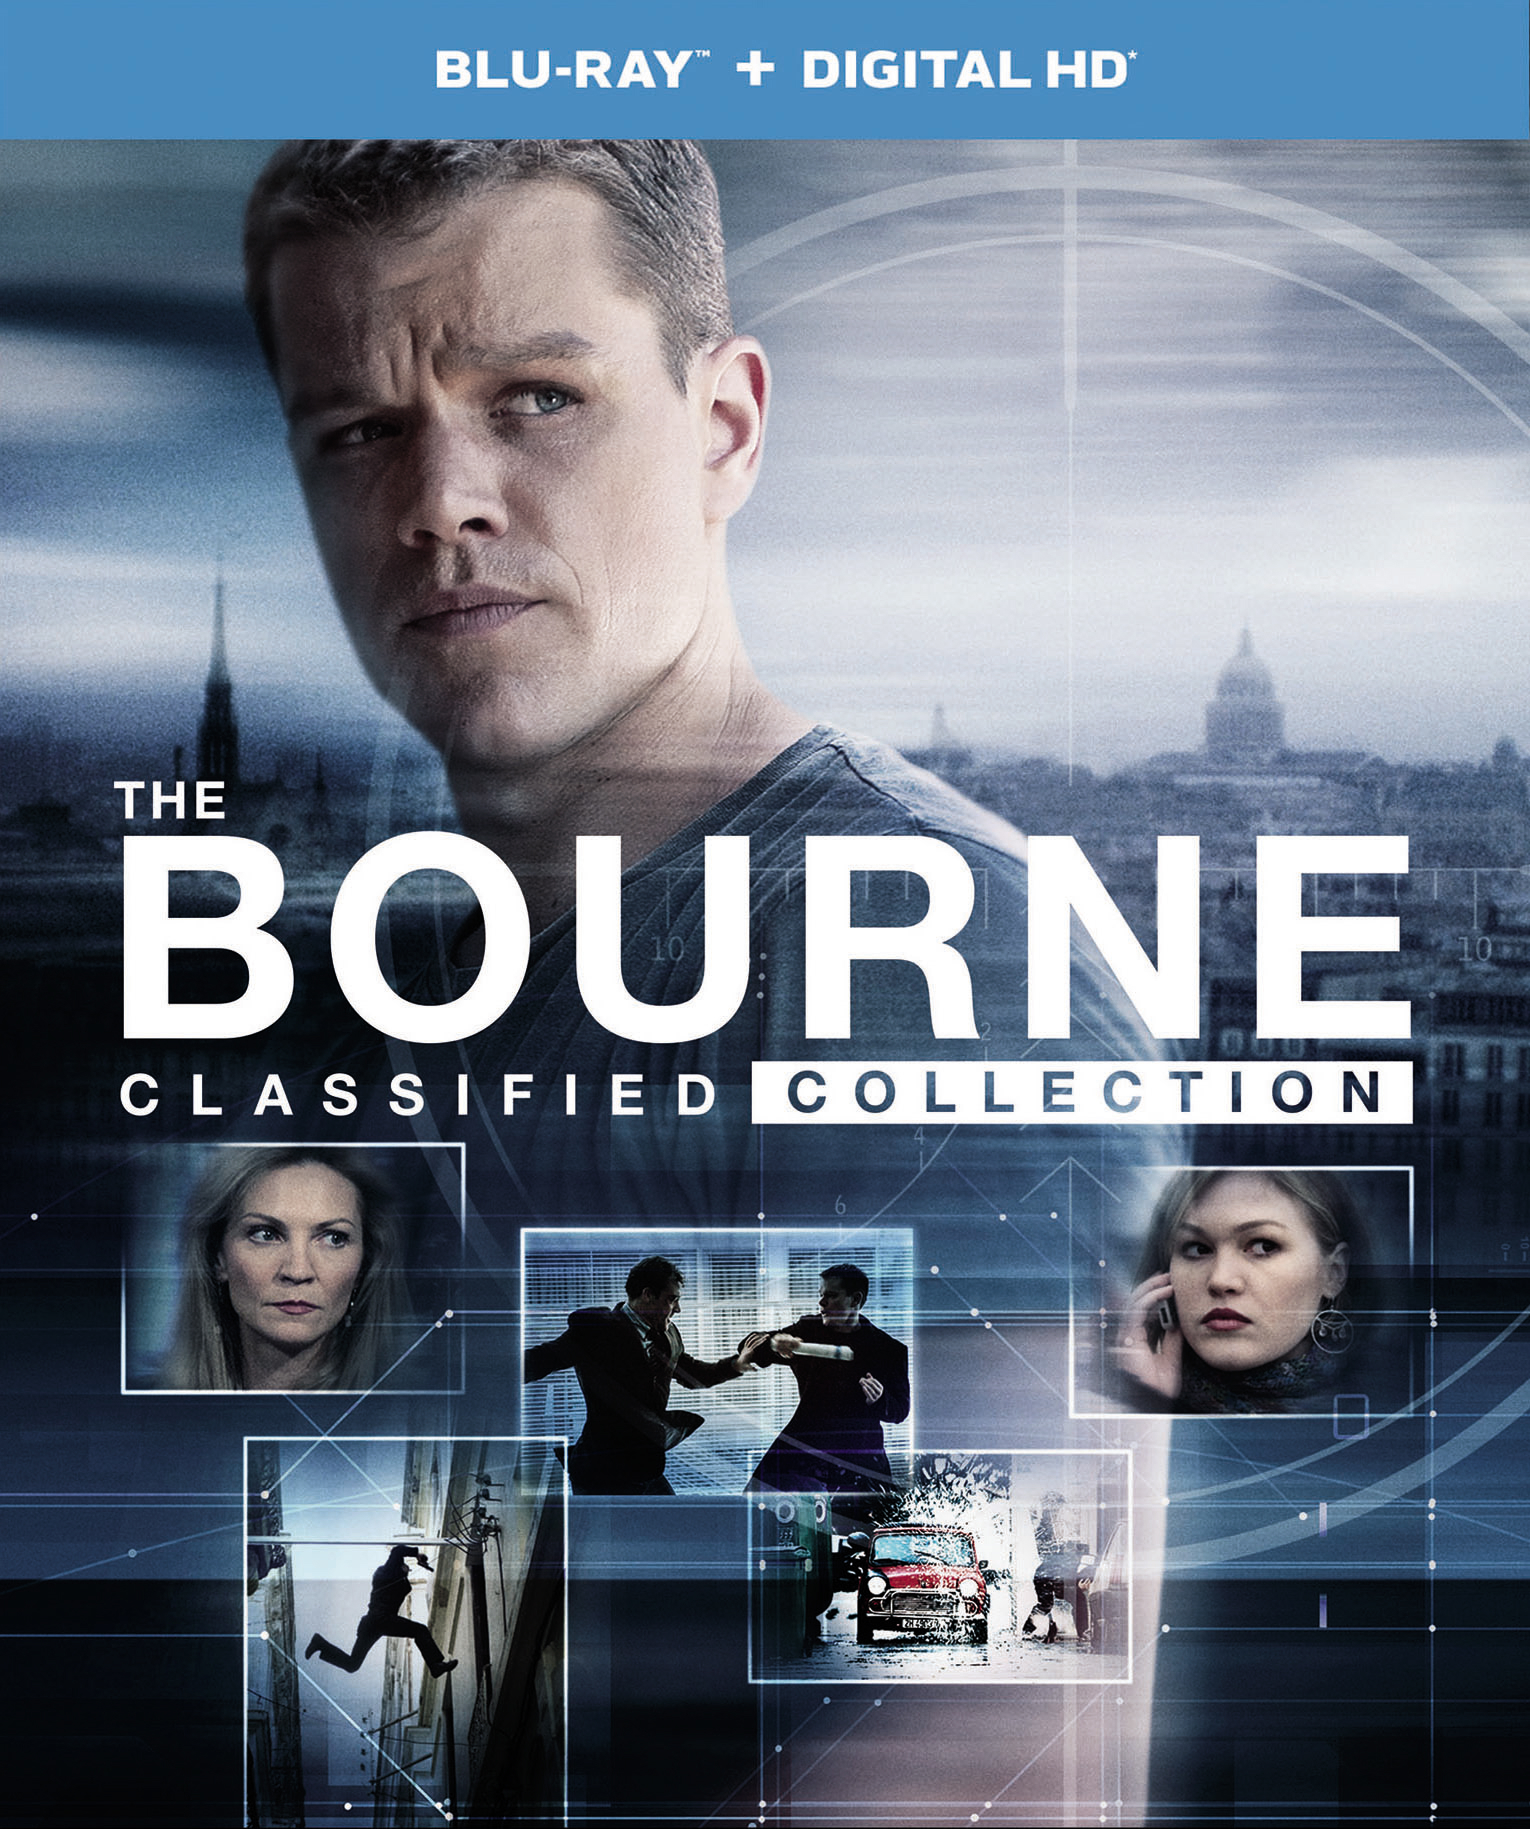 The Bourne Classified Collection - Blu-ray [ 2012 ]  - Action Movies On Blu-ray - Movies On GRUV